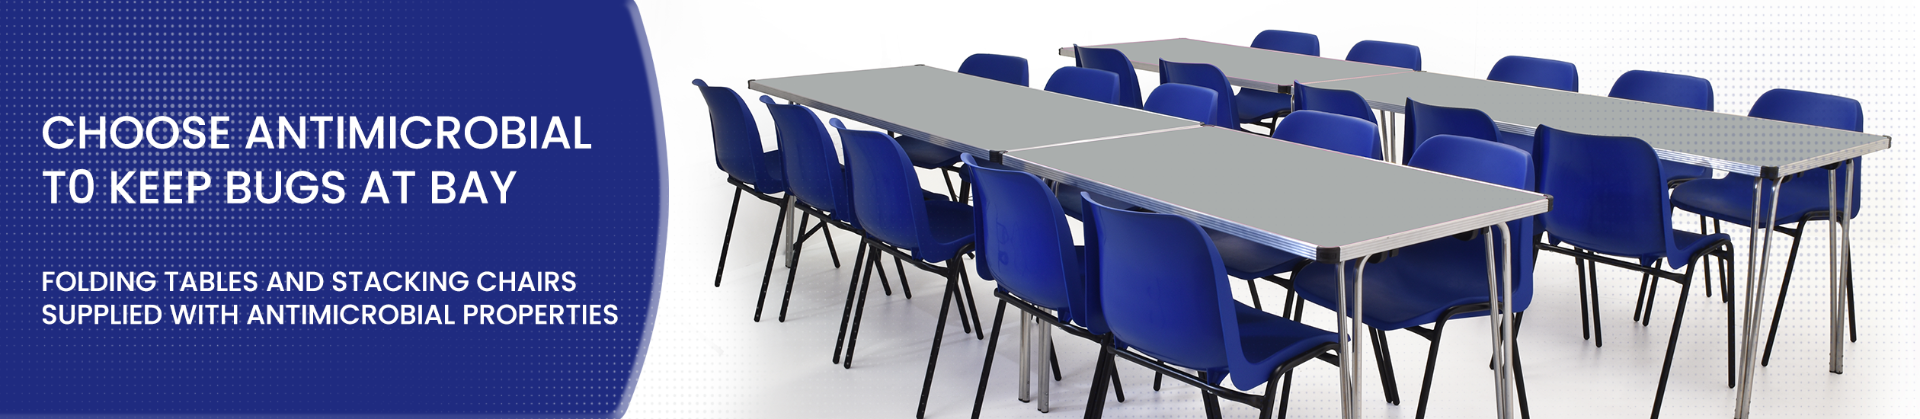 Choose Antimicrobial to keep bugs at bay - folding tables and stacking chairs supplied with antimicrobial properties